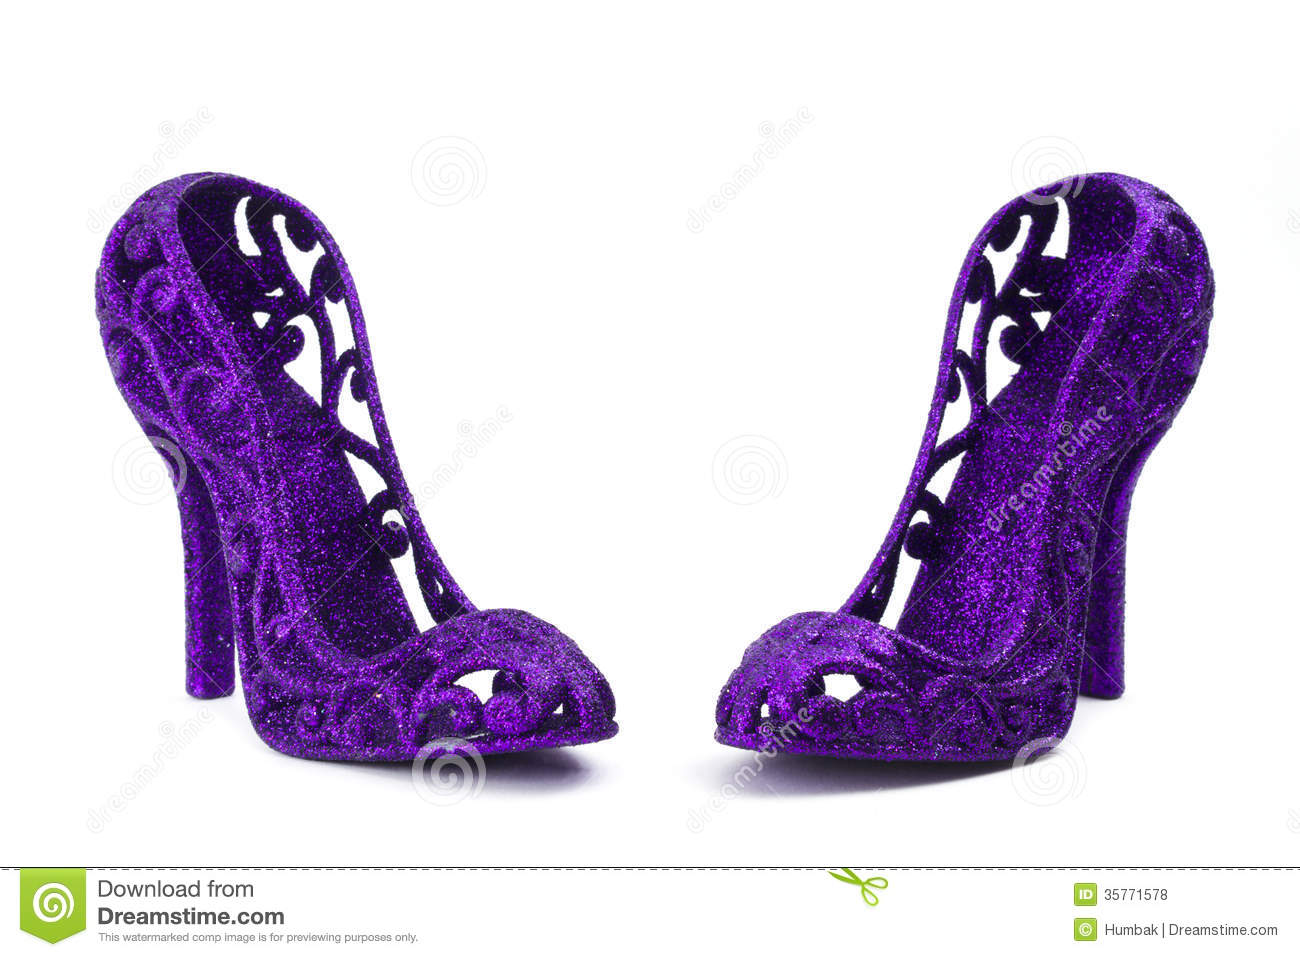 There Is 33 High Heels No Background Free Cliparts All Used For Free